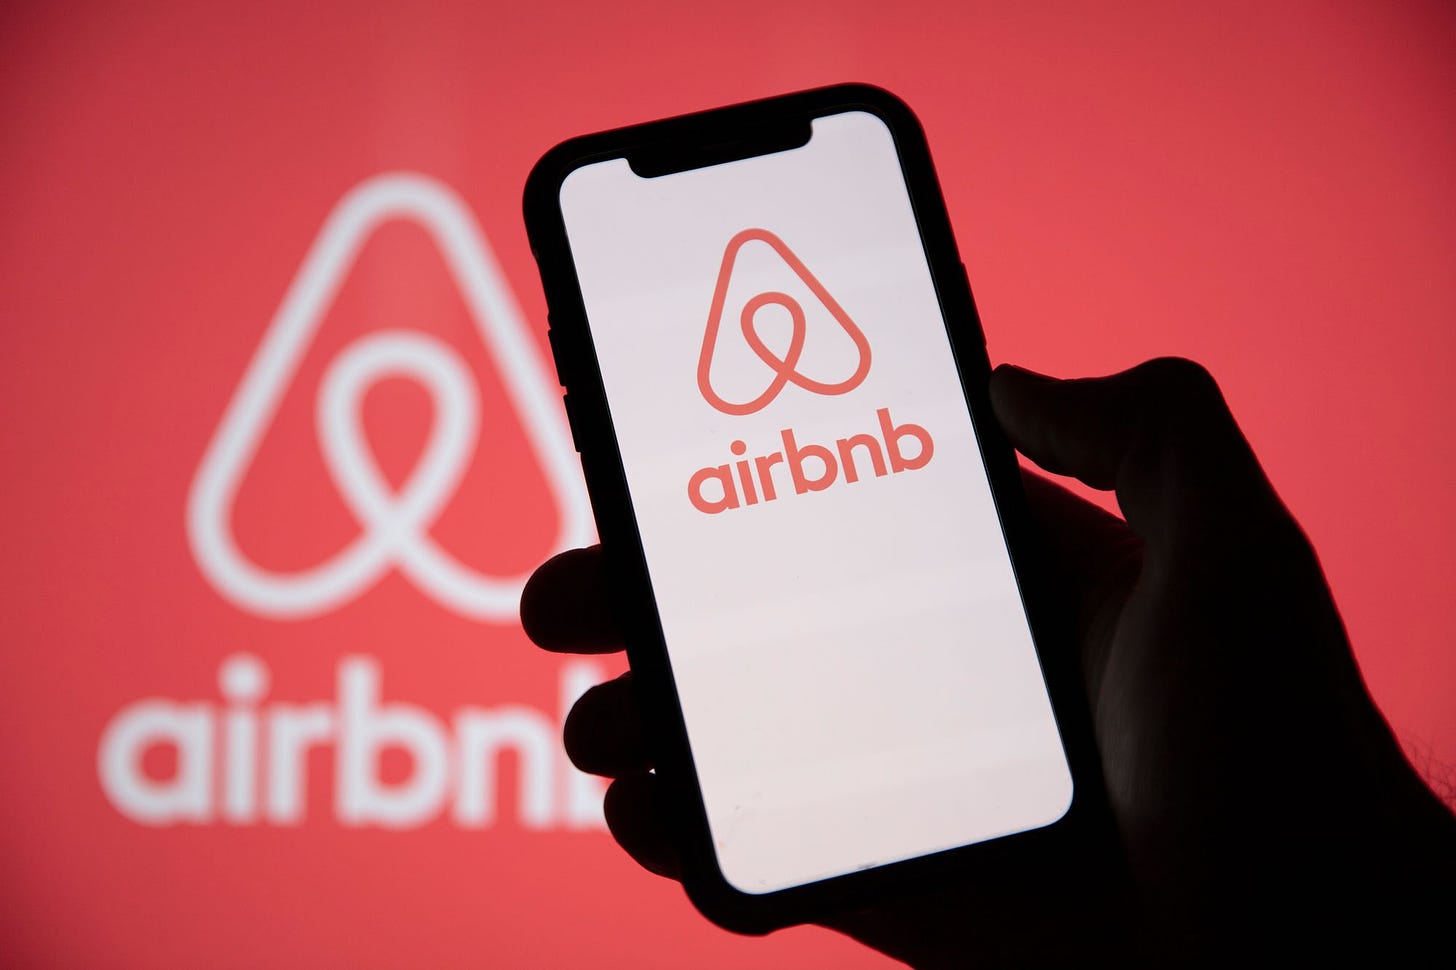 Woman Faces $6,864 Airbnb 